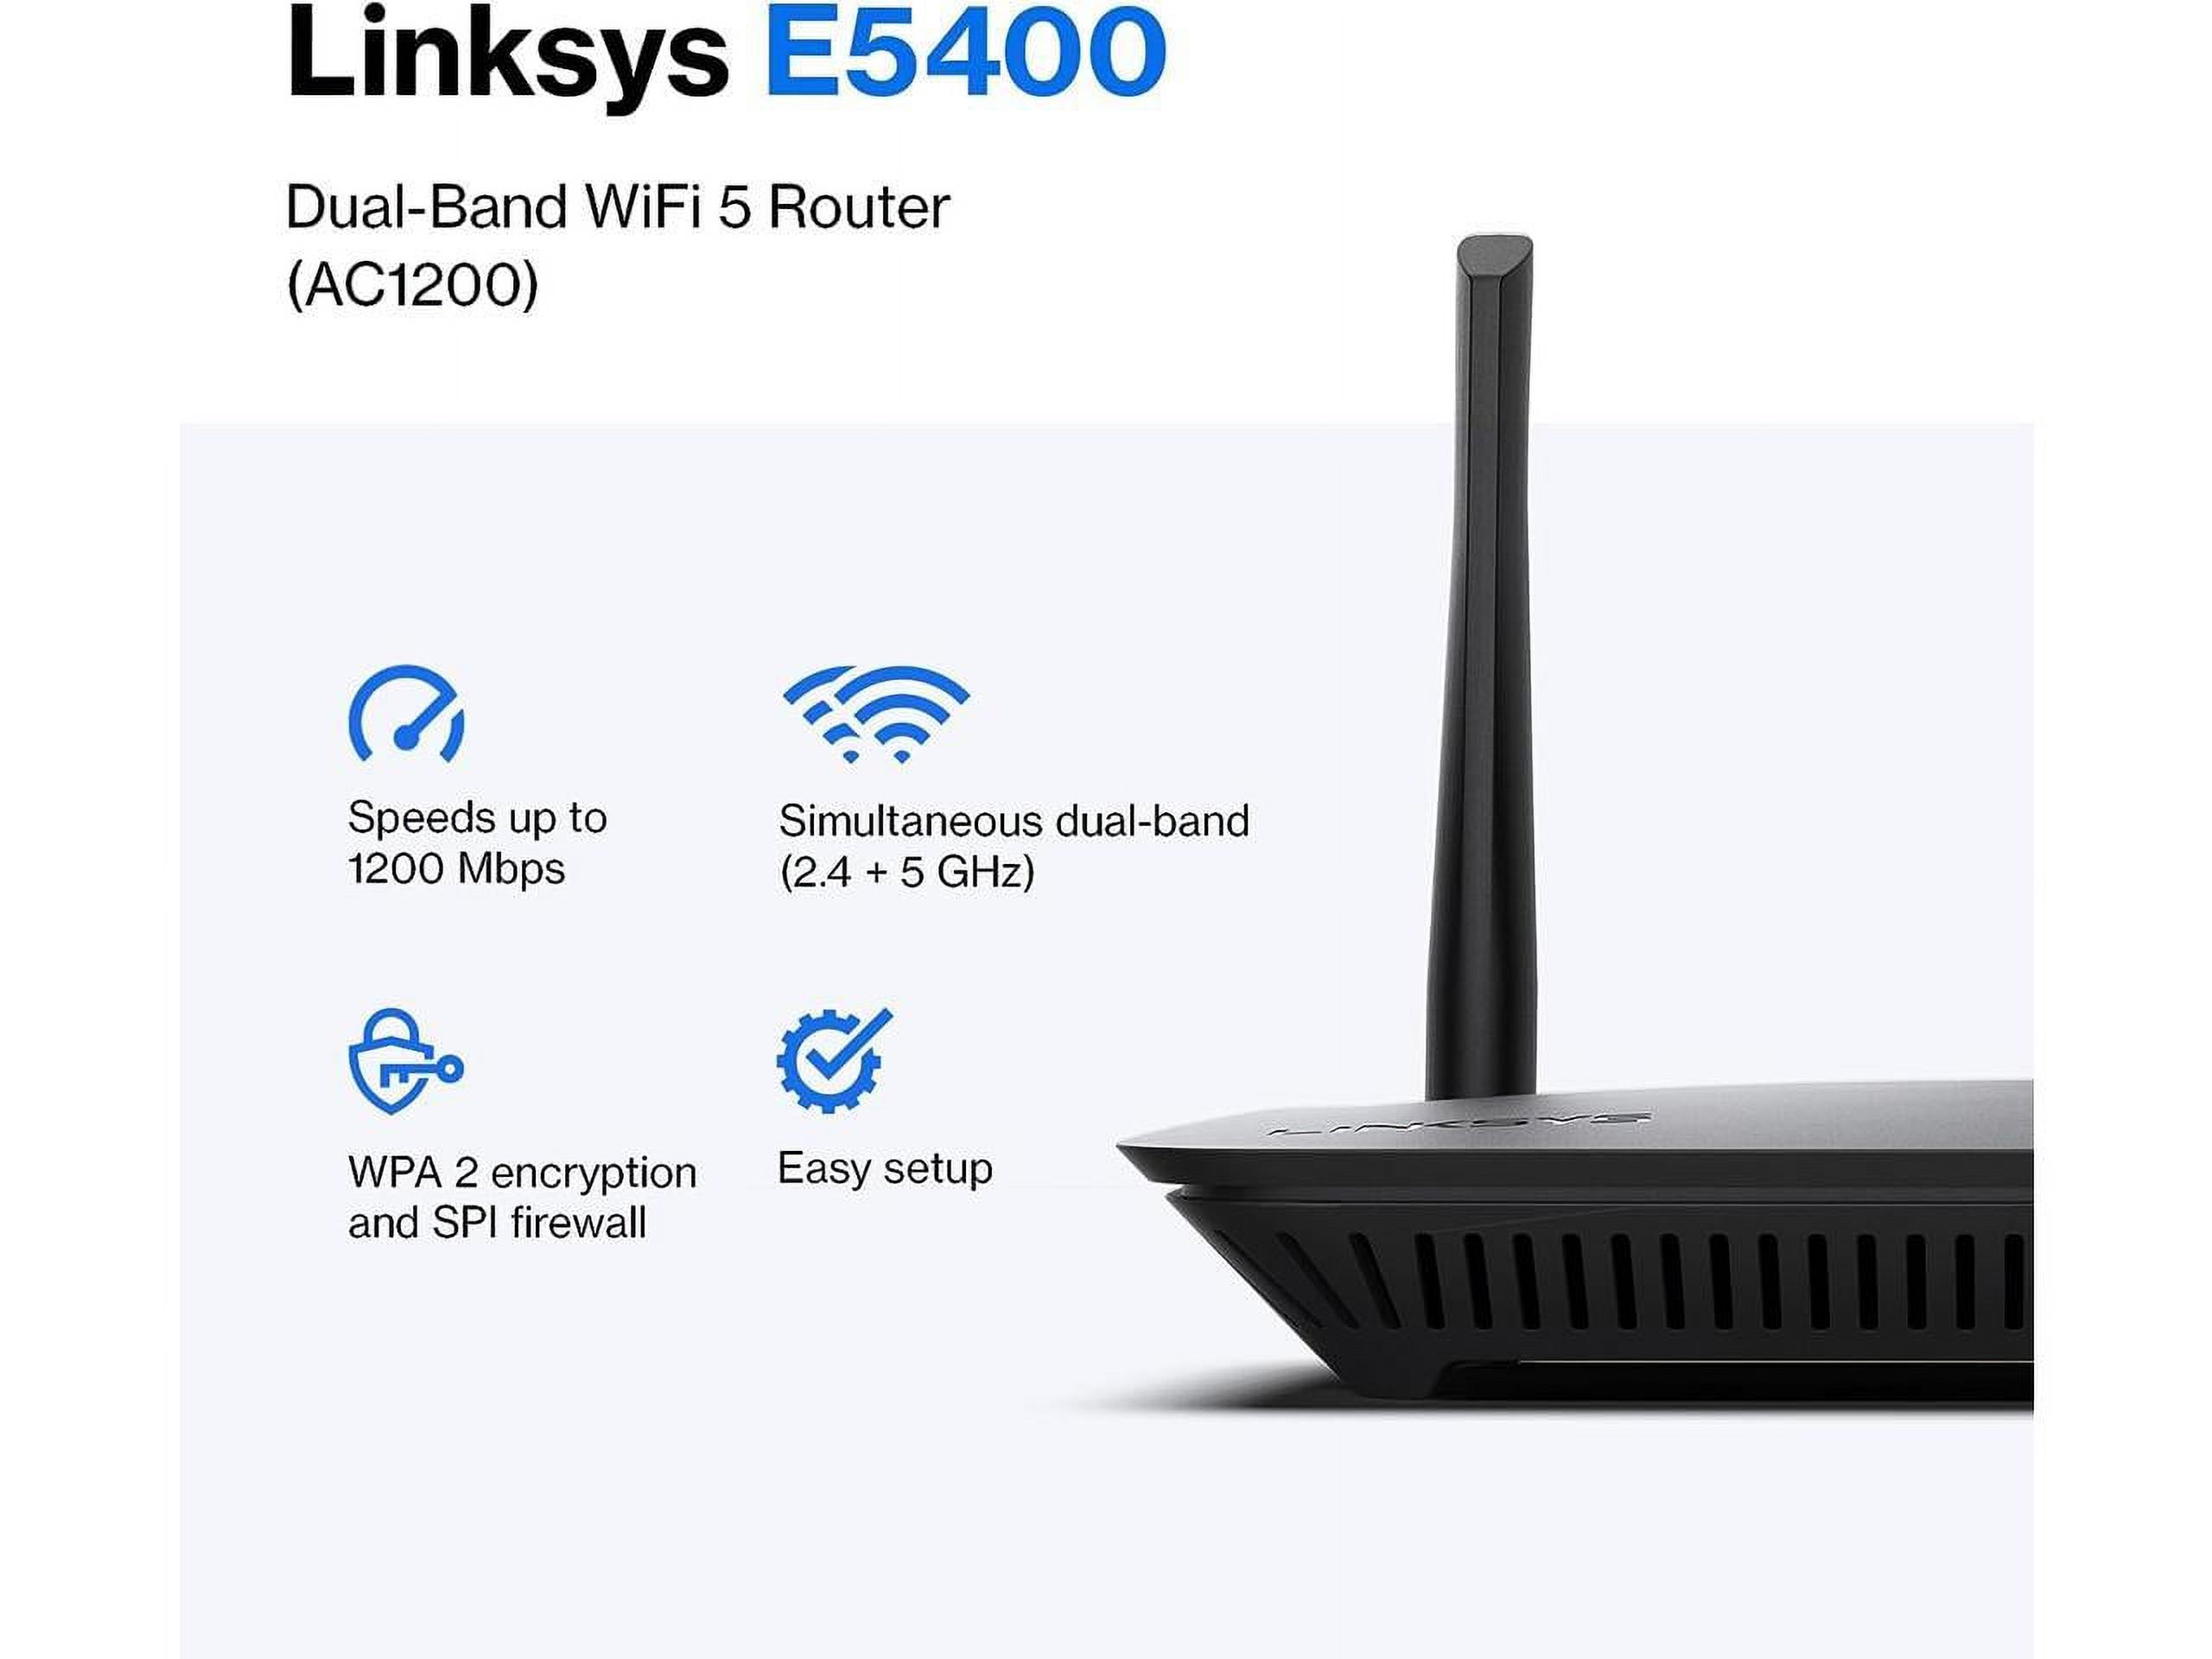 Linksys AC1200 Dual Band WiFi 5 Router with Easy Setup, Black - image 2 of 5